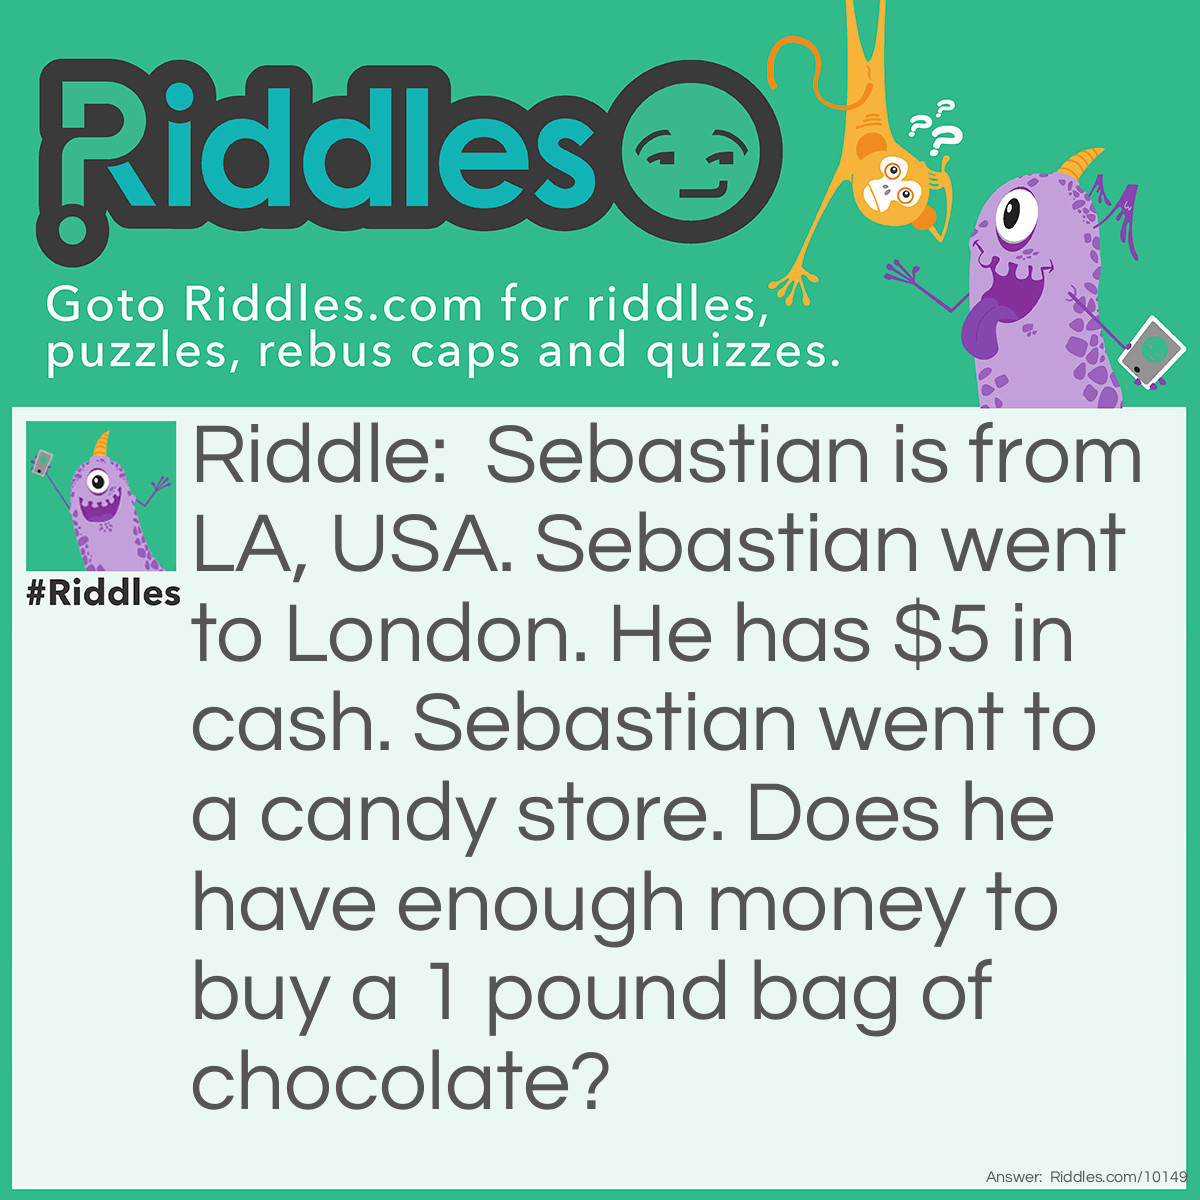 Riddle: Sebastian is from LA, USA. Sebastian went to London. He has $5 in cash. Sebastian went to a candy store. Does he have enough money to buy a 1 pound bag of chocolate? Answer: No. 1 pound means one pound in UK currency. Even though 1 pound is worth less than $5 US, US dollars are not accepted in the UK. Sebastian has to exchange his US dollars for British pounds.